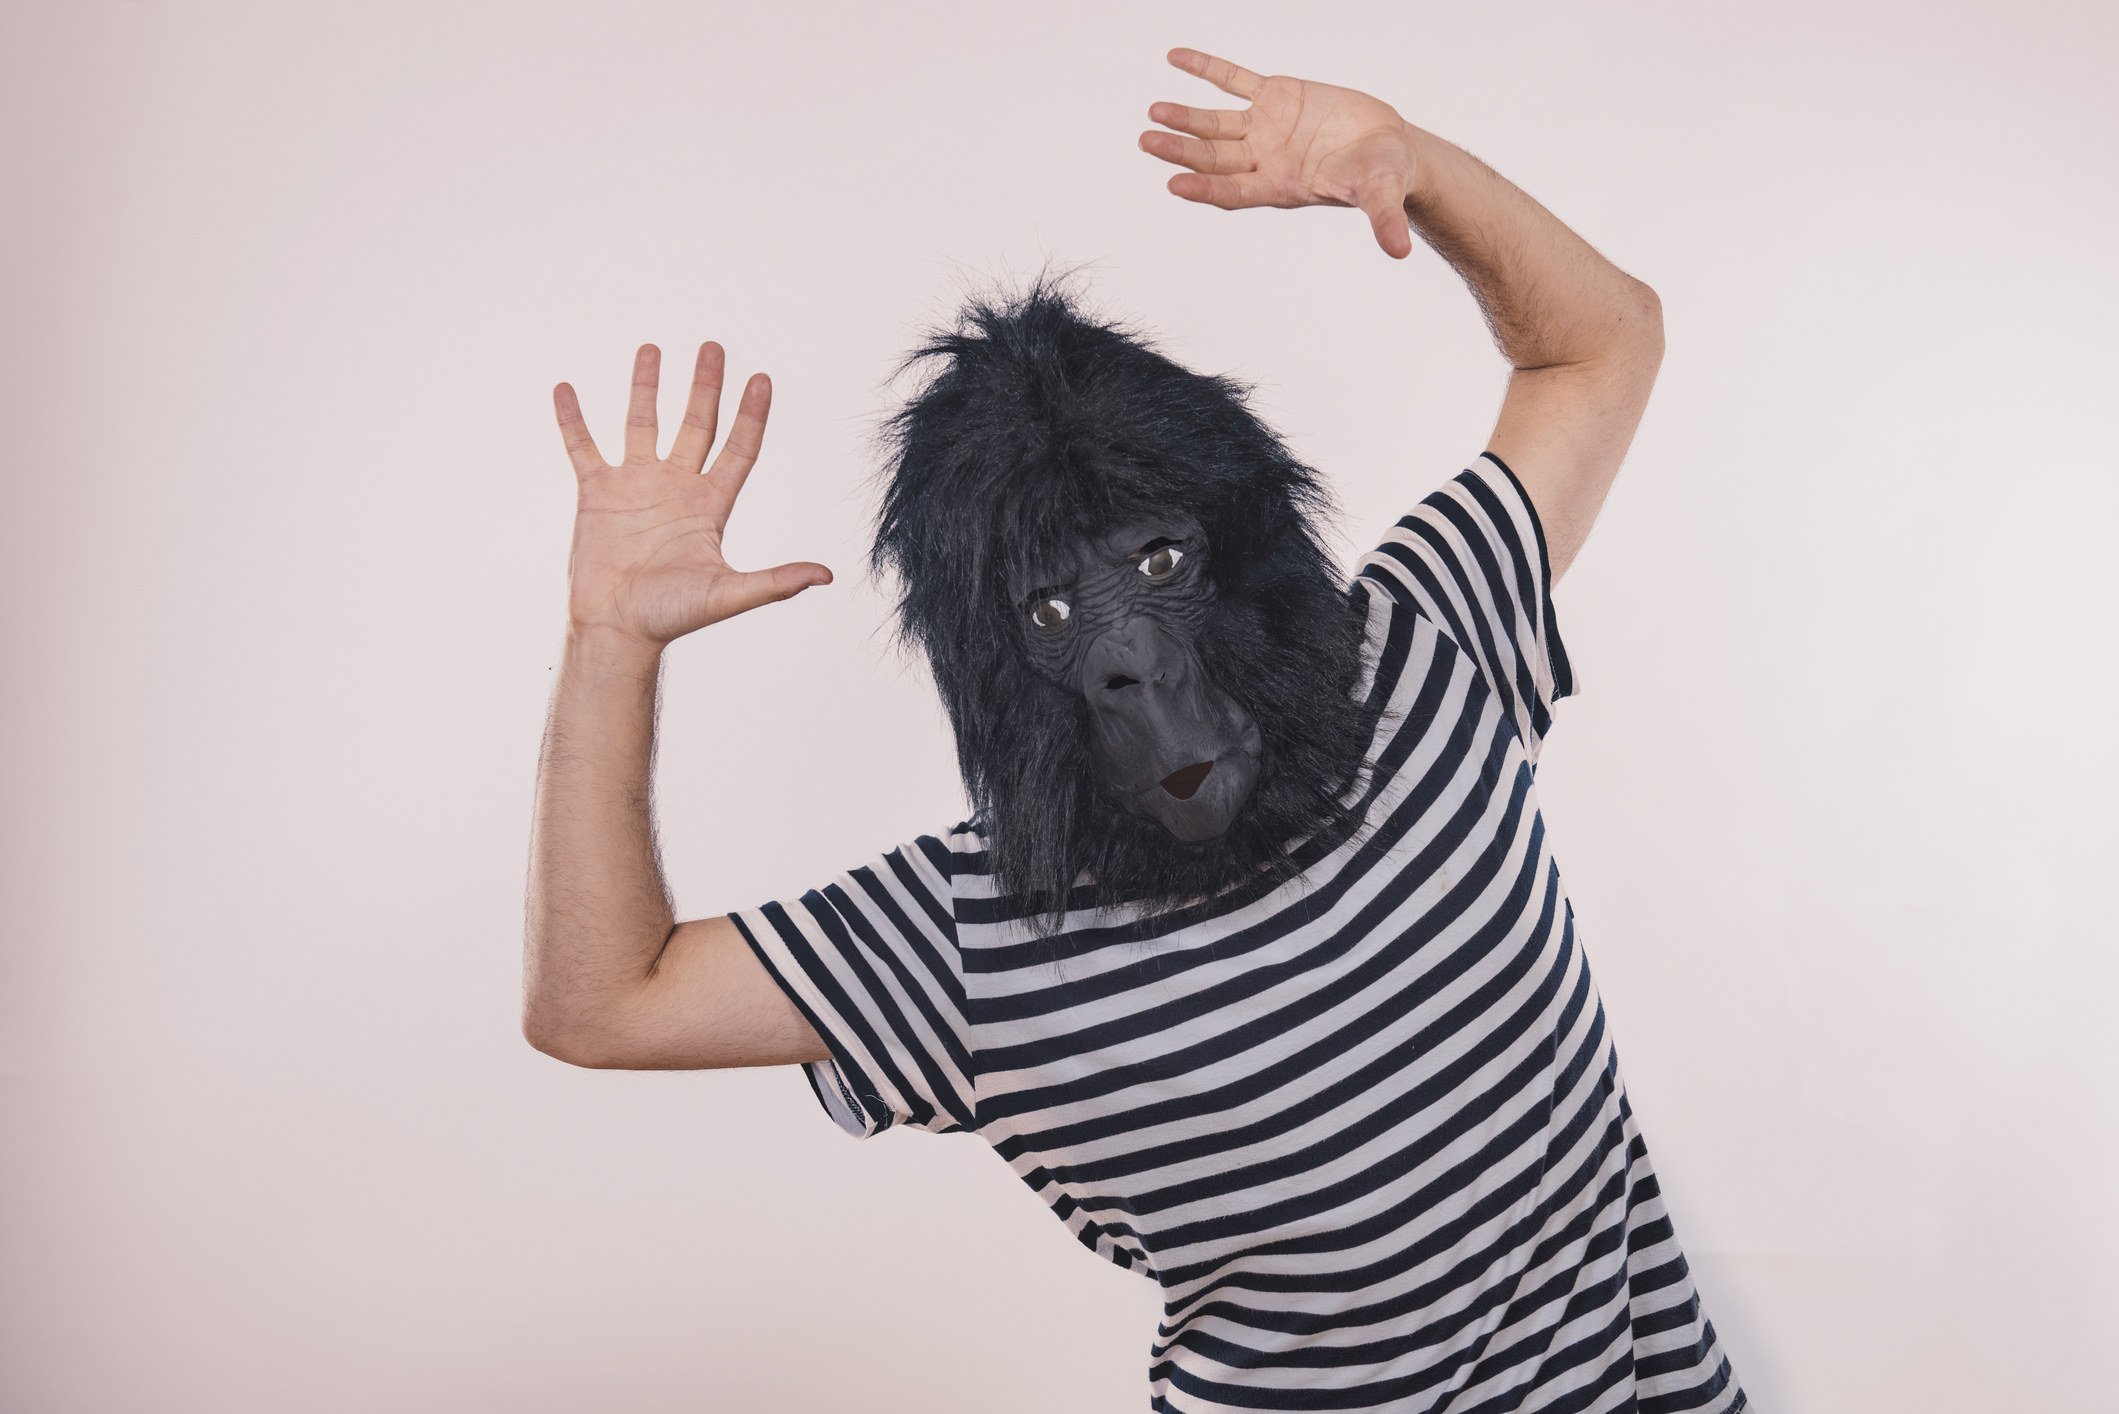 A stock image of a person in a gorilla mask waving their hands